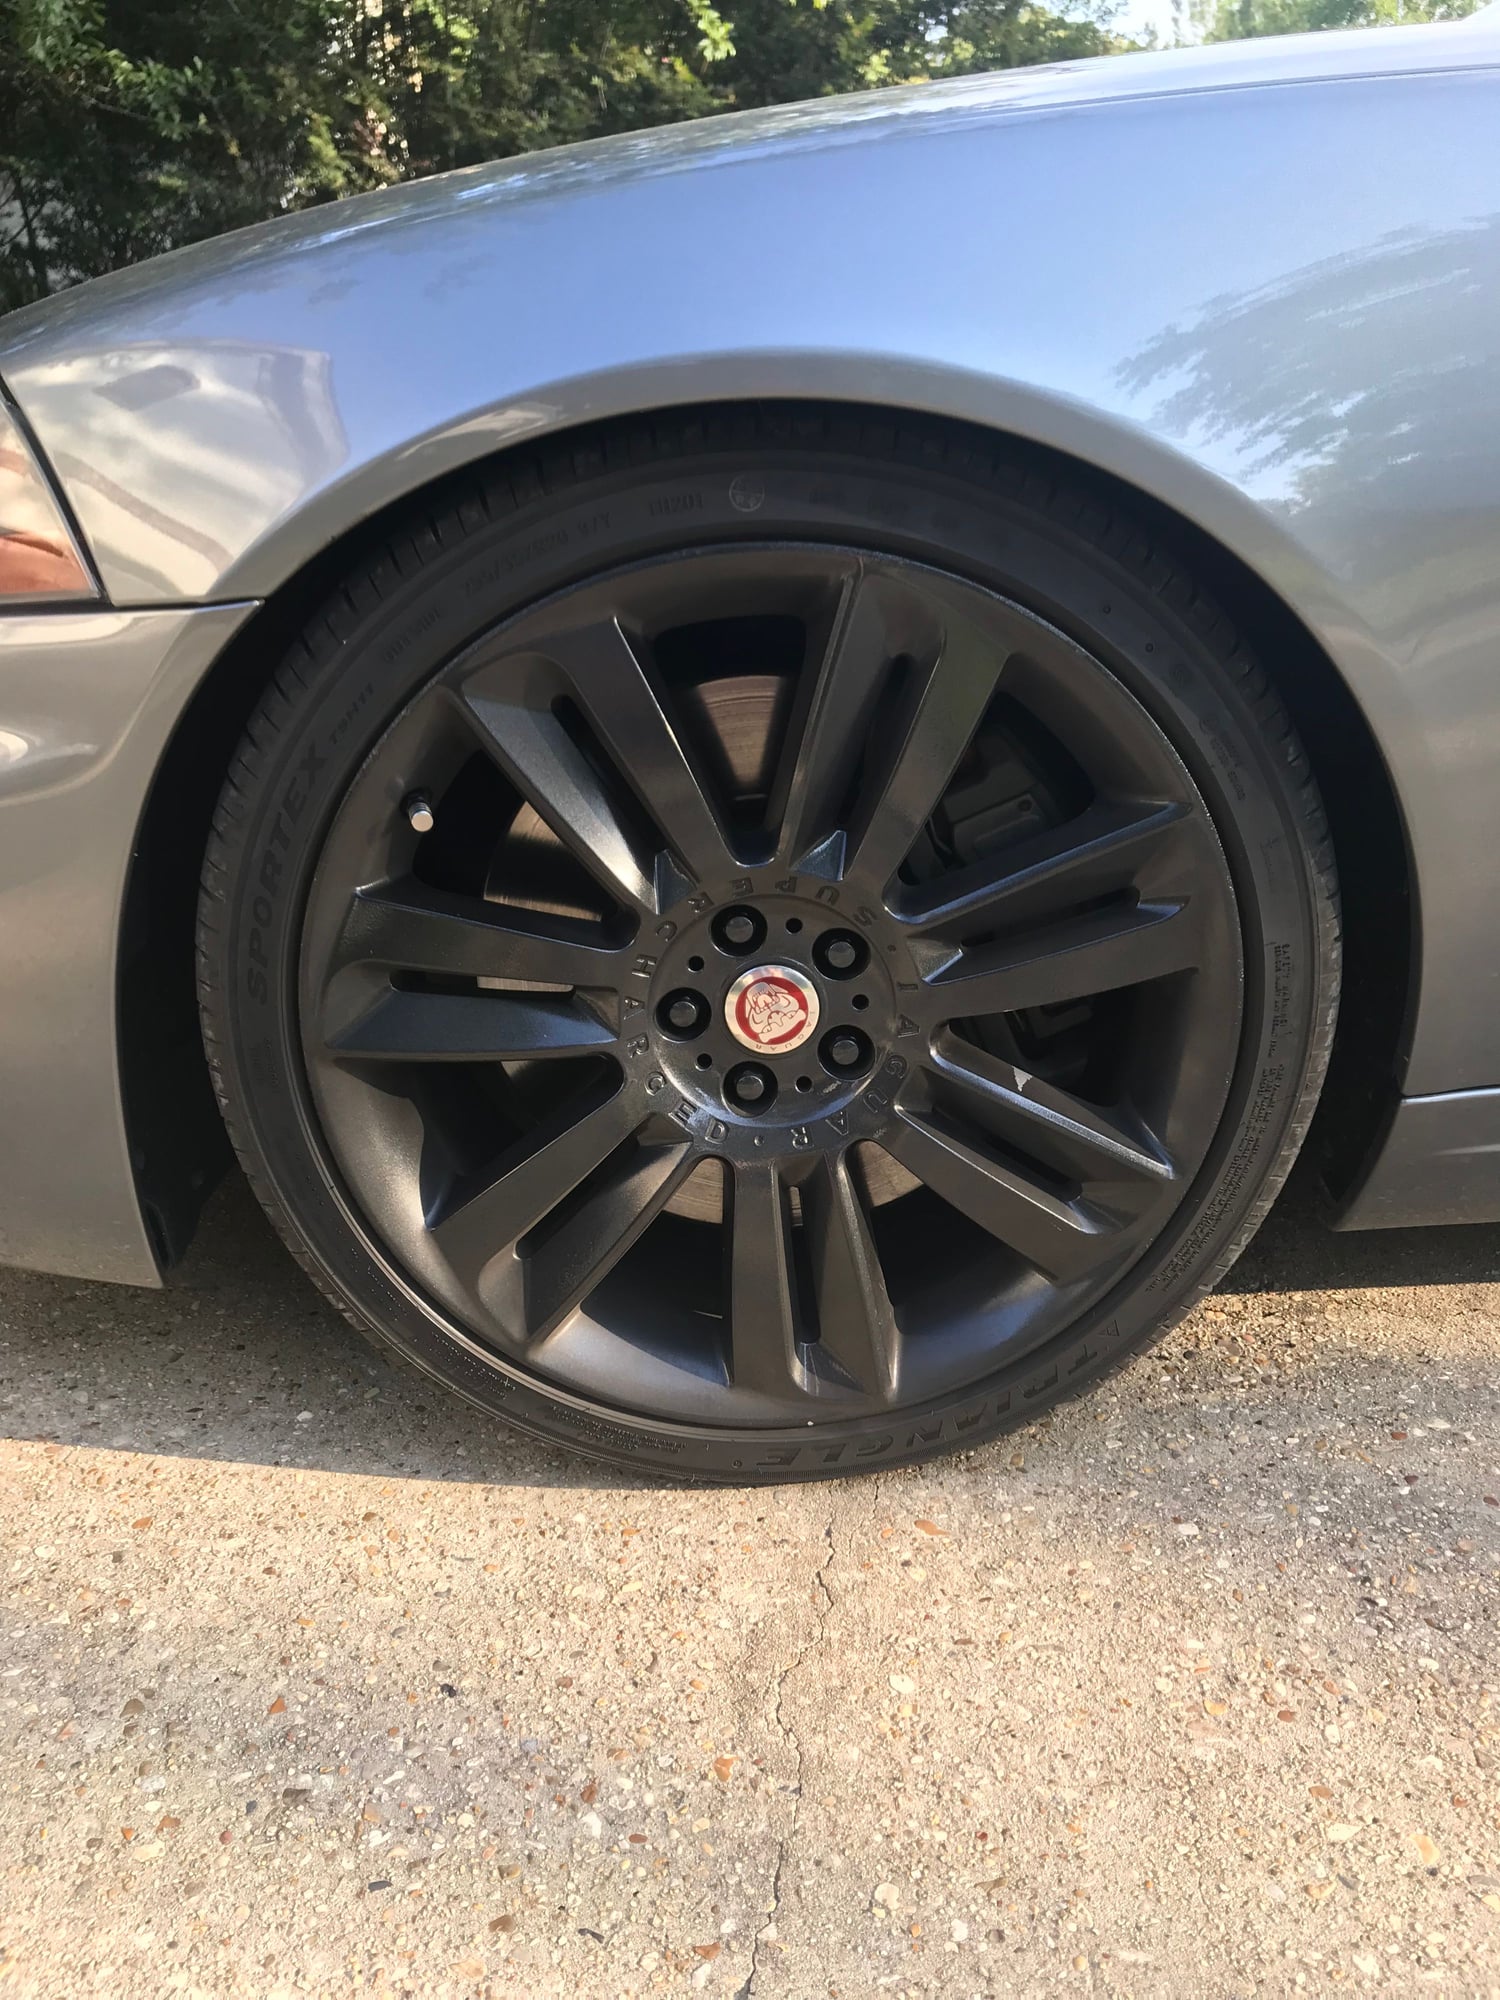 Wheels and Tires/Axles - 20" XKR Nevis Wheels & Tires - Used - 2010 to 2015 Jaguar XKR - 2010 to 2015 Jaguar XFR - Purvis, MS 39475, United States